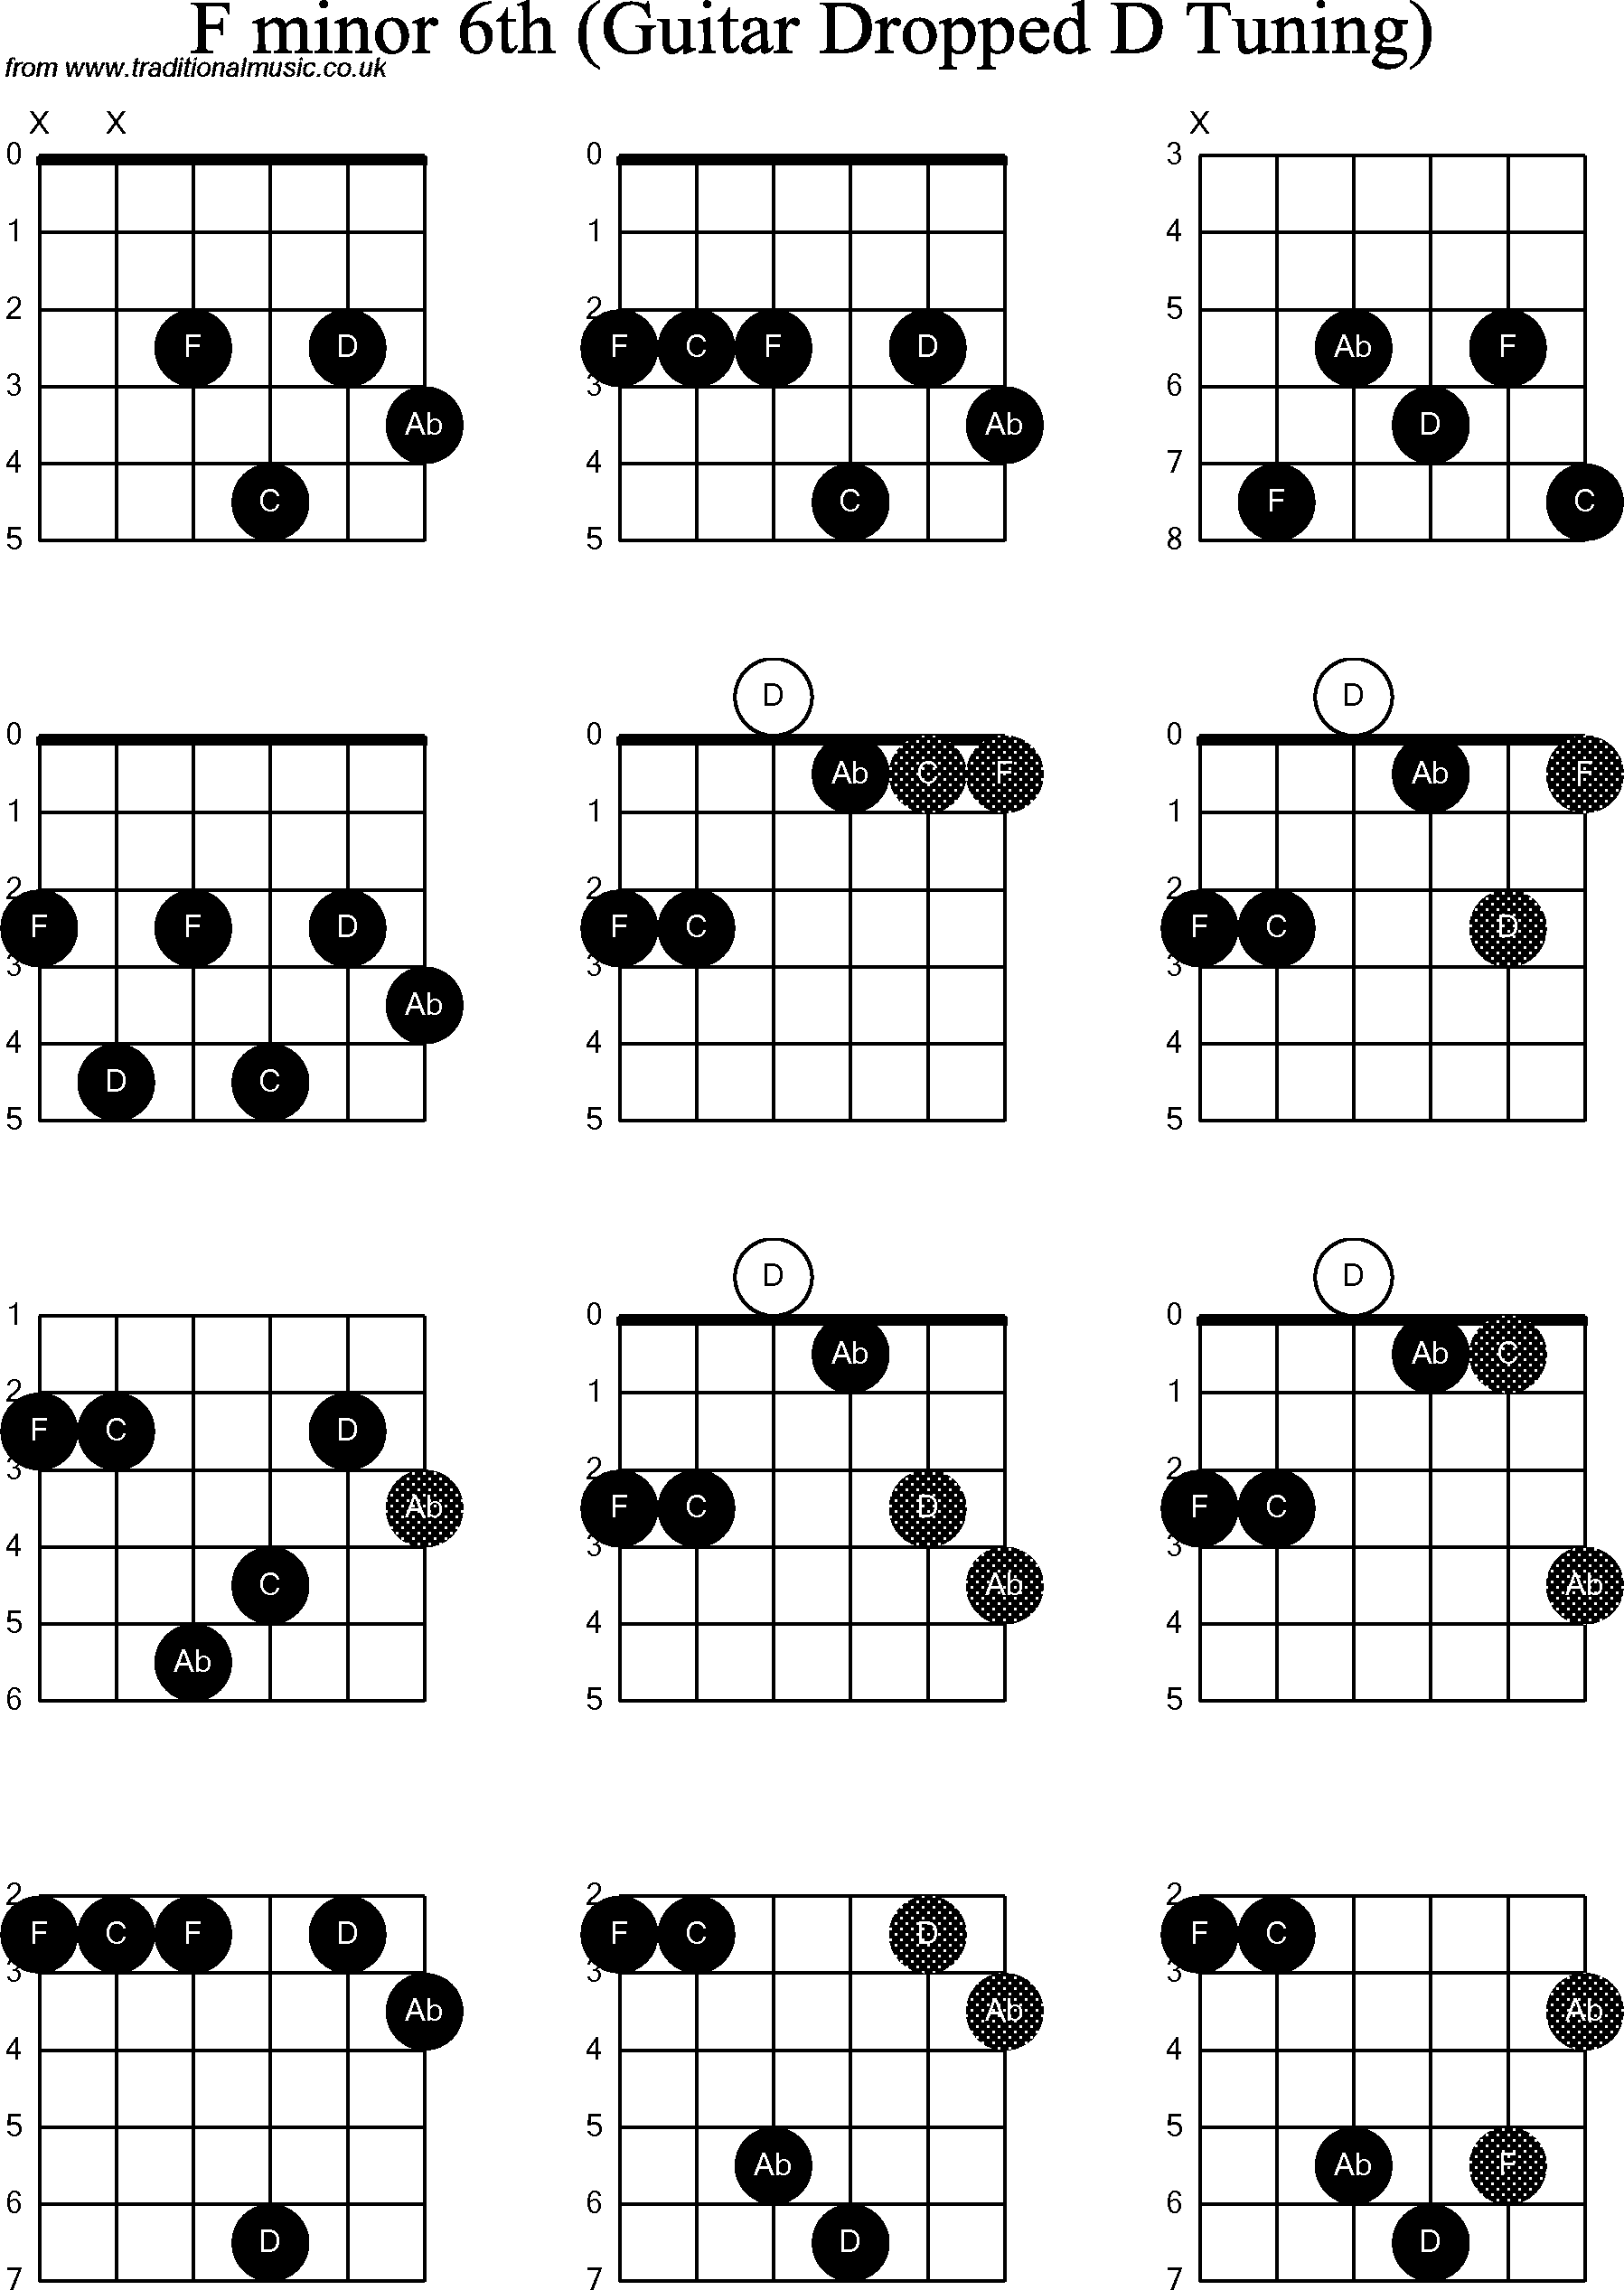 Chord diagrams for dropped D Guitar(DADGBE), F Minor6th